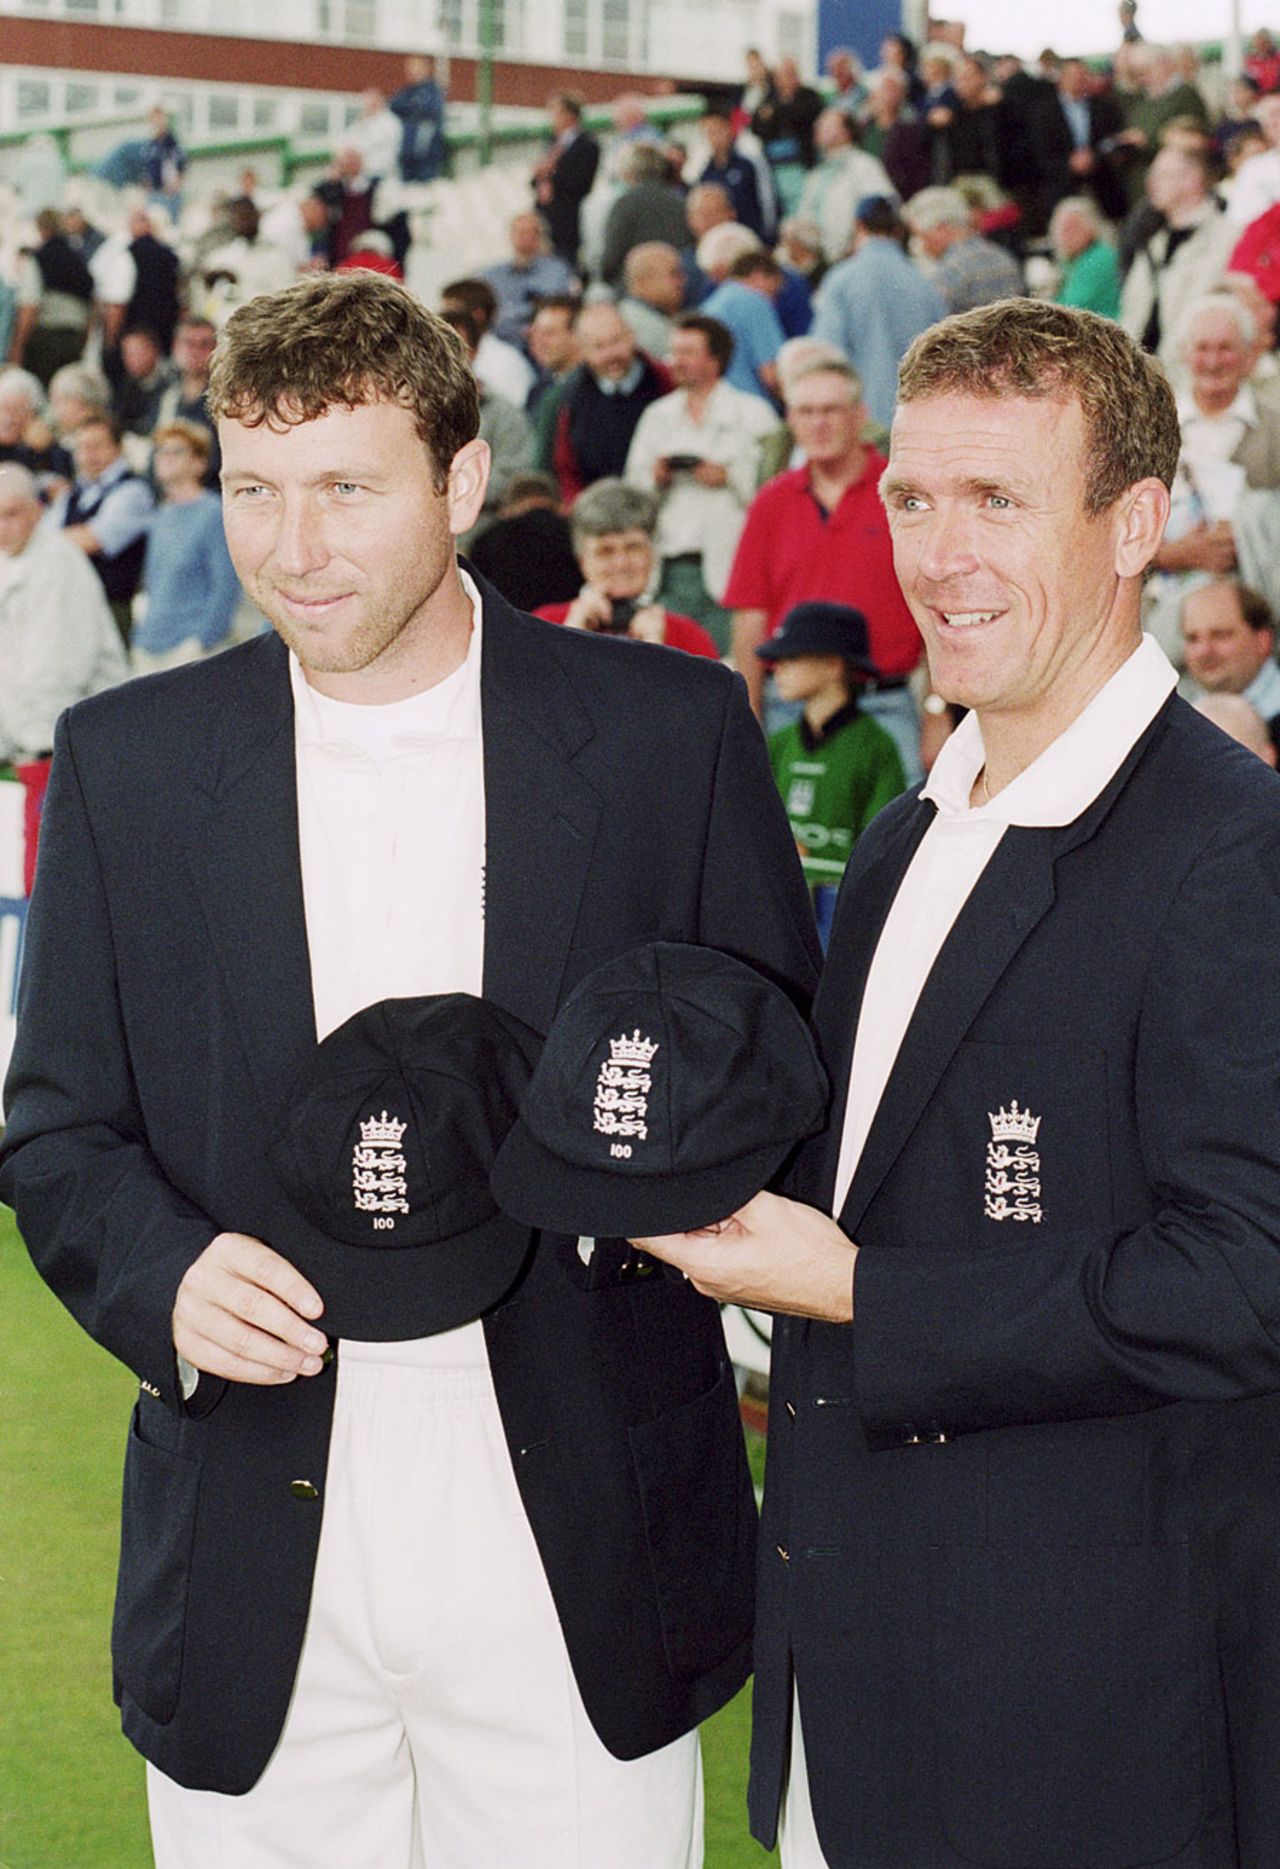 Michael Atherton and Alec Stewart receive caps ahead of their 100th Test appearance, England v West Indies, 3rd Test, Old Trafford, 1st day, August 3, 2000